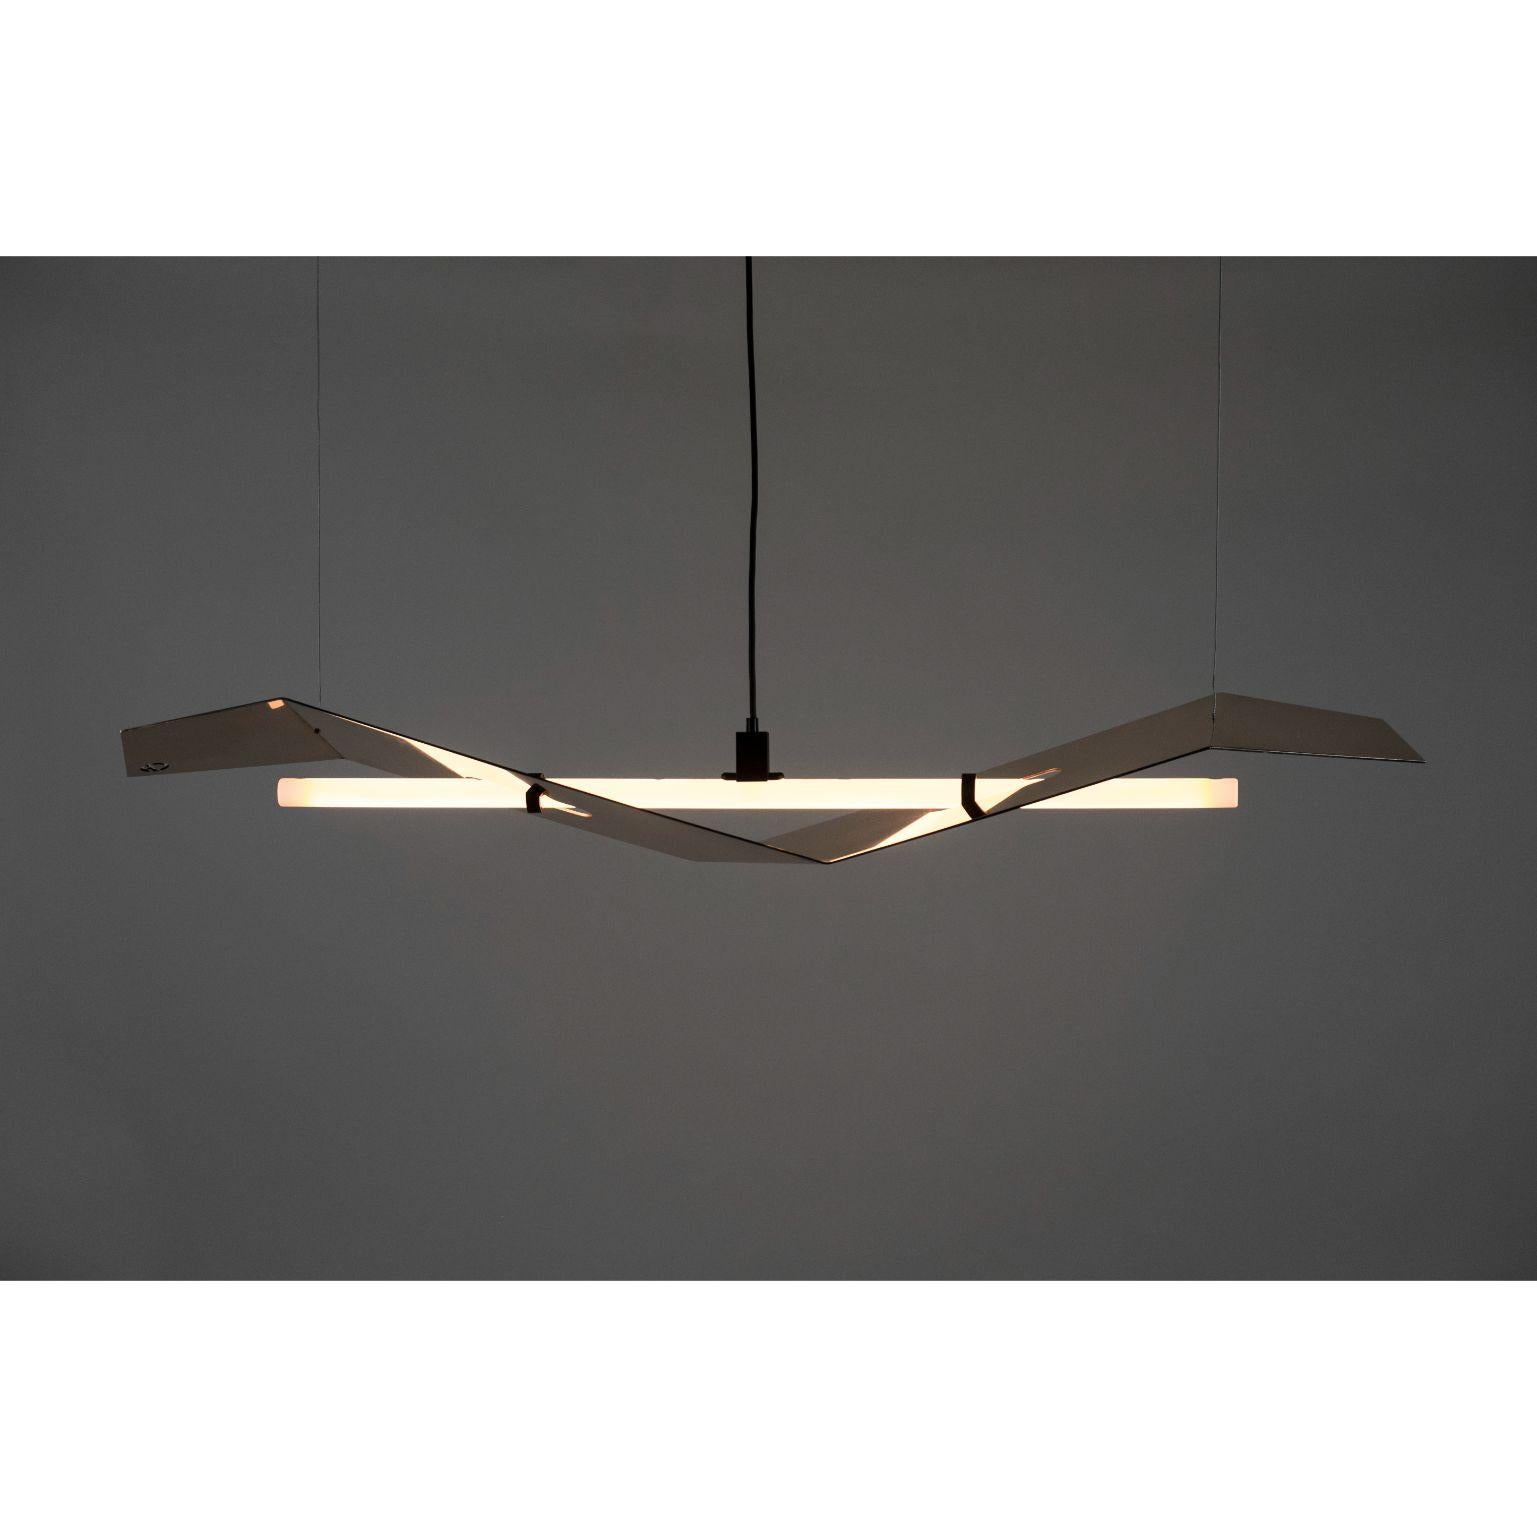 Bird of prey pendant light by Atelier Haute Cuisine
Dimensions: 135 x 25,5 x 18 cm
Materials: Bronze

All our lamps can be wired according to each country. If sold to the USA it will be wired for the USA for instance.
 
A pendant light formed